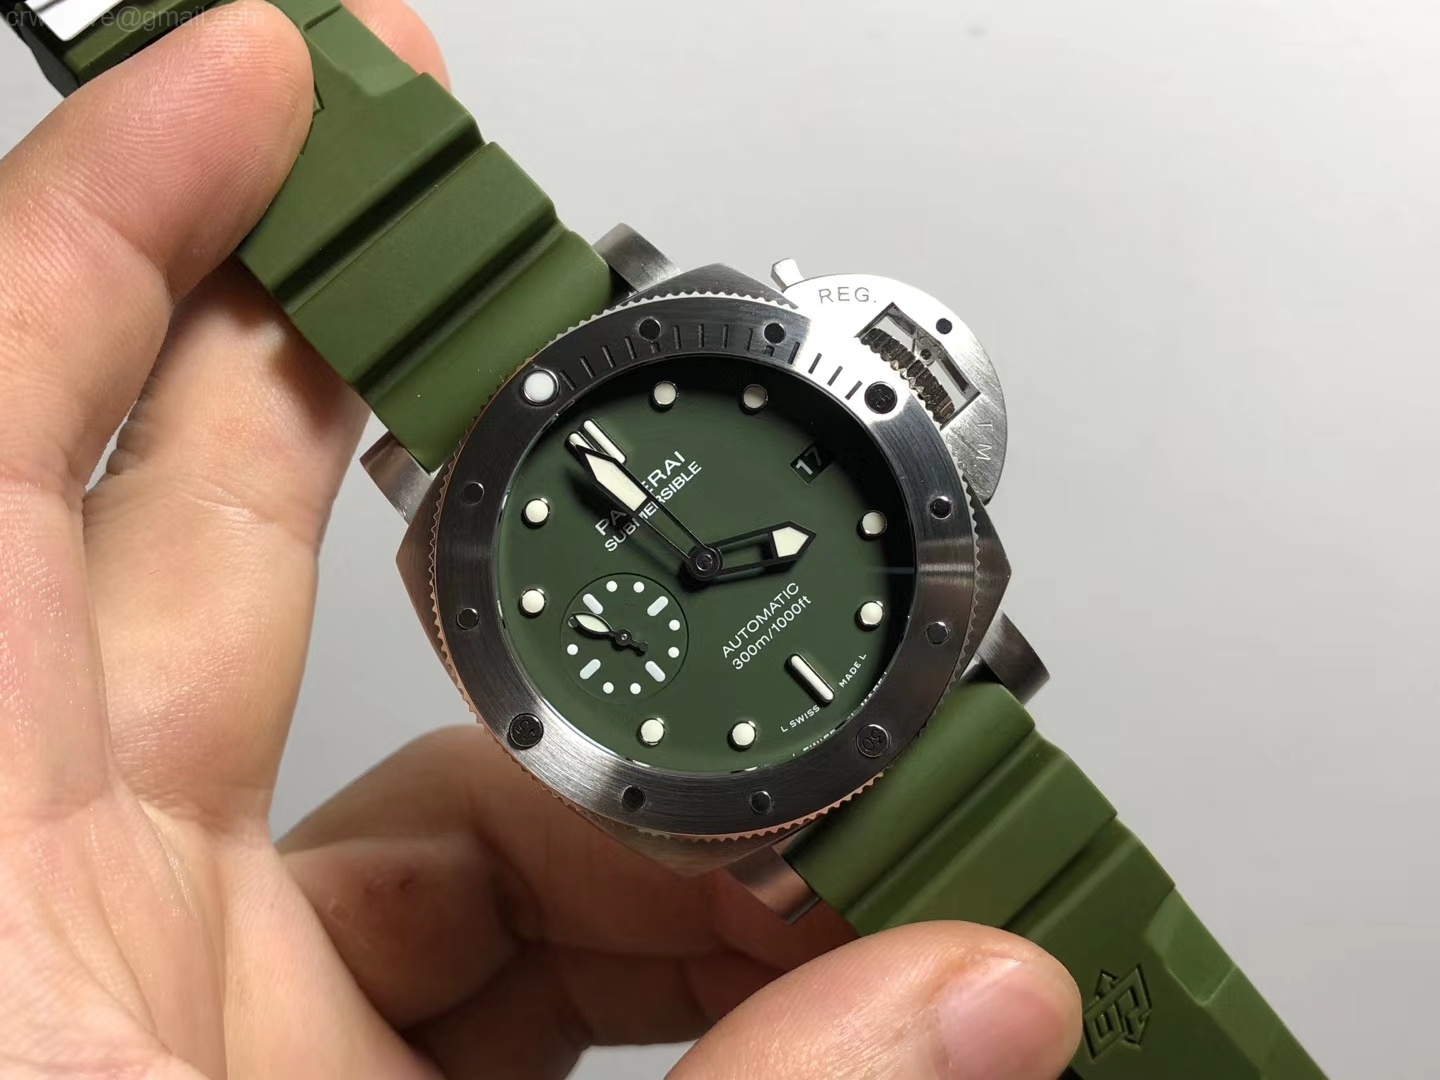 VSF New release Best Edition Panerai PAM1055 Luminor Submersible 42mm